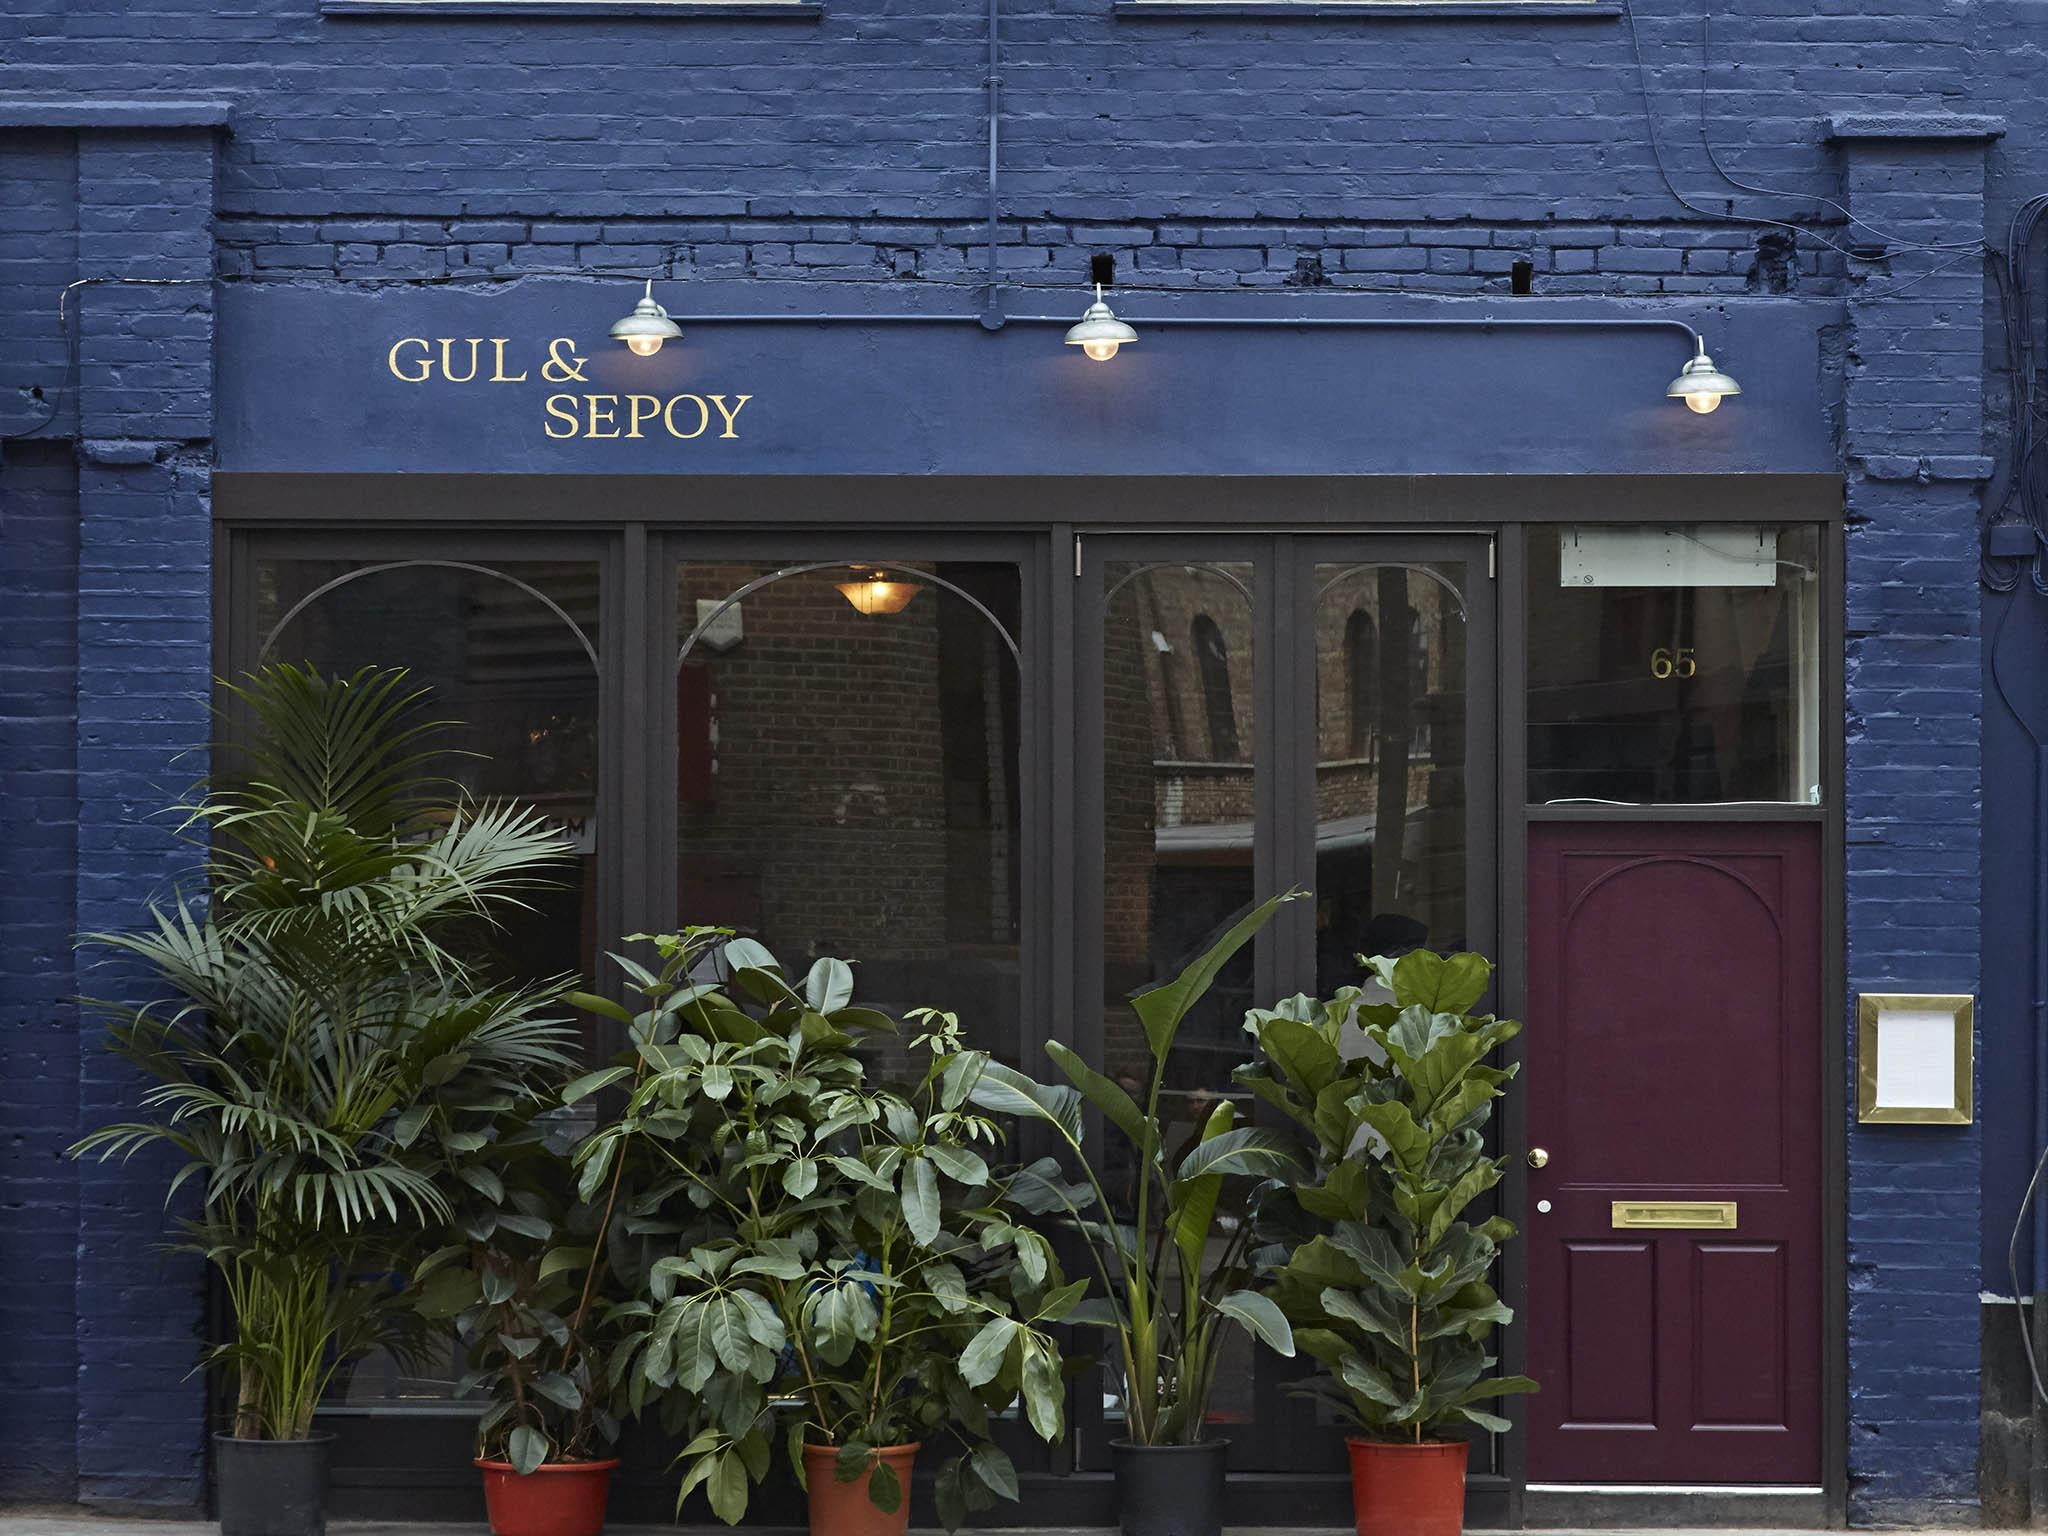 &#13;
&#13;
Situated in Spitalfields, Gul and Sepoy serves reimagined regional Indian cuisine &#13;